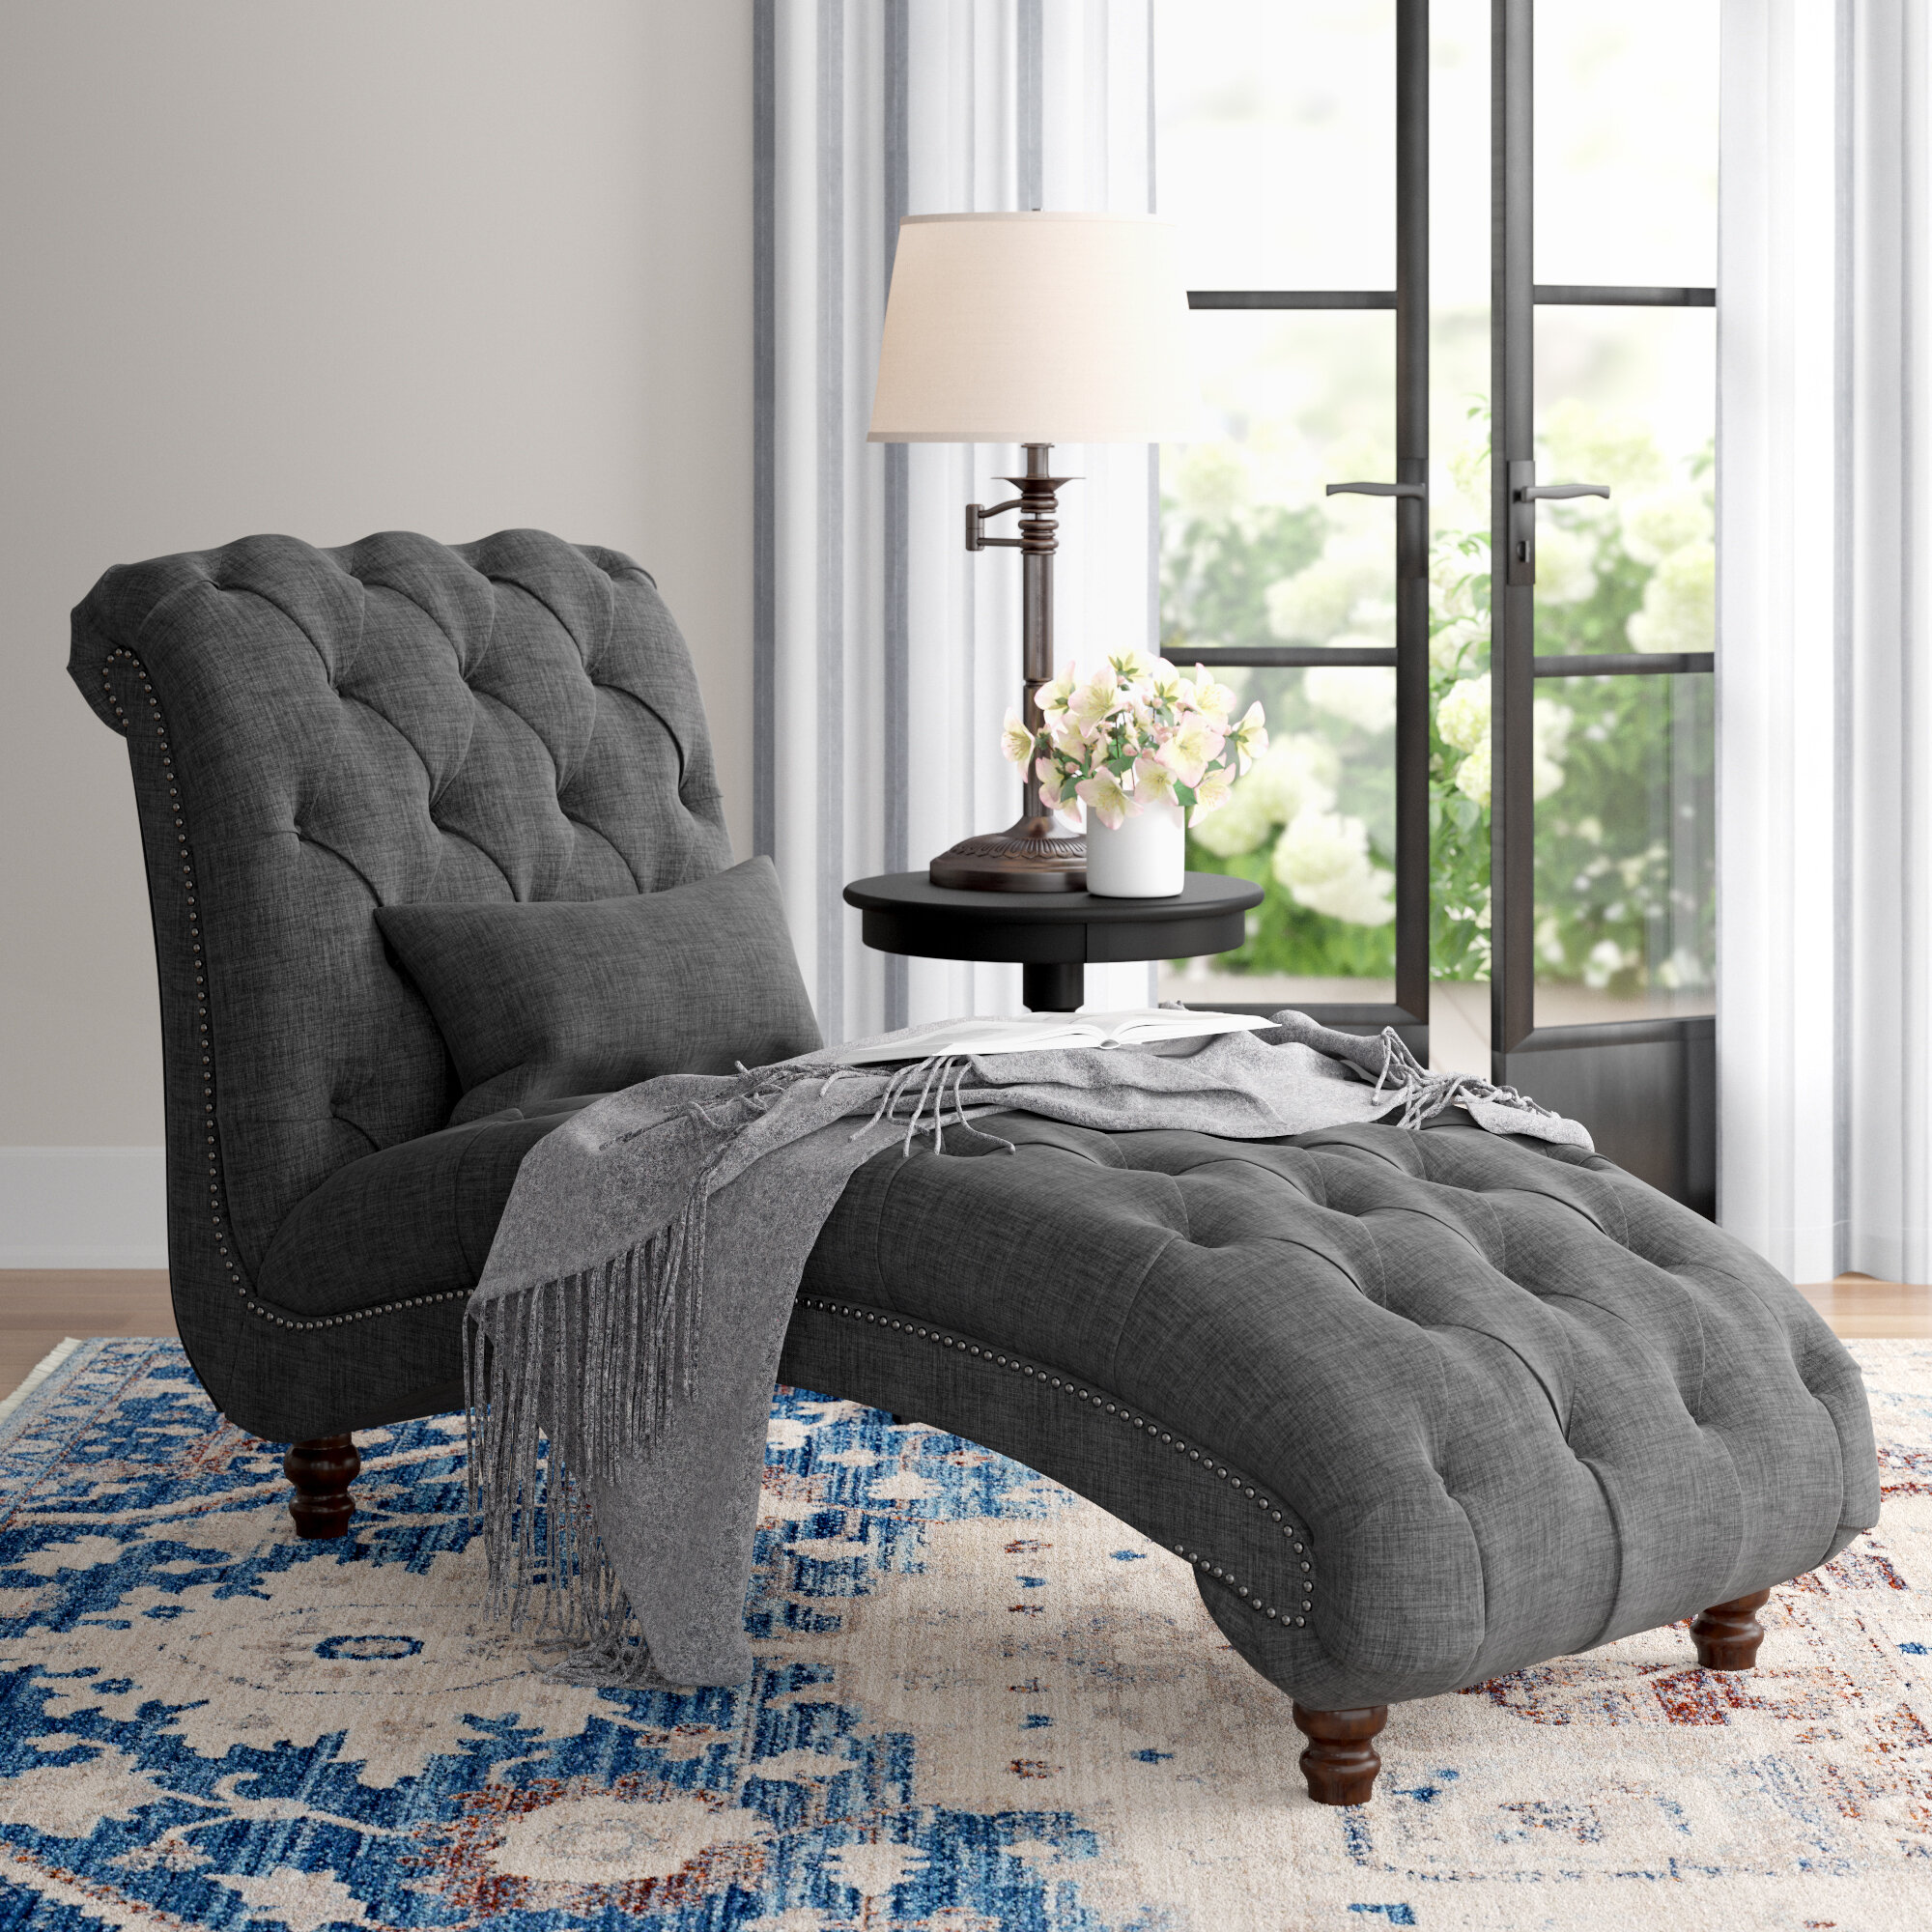 Gowans Upholstered Chaise Lounge